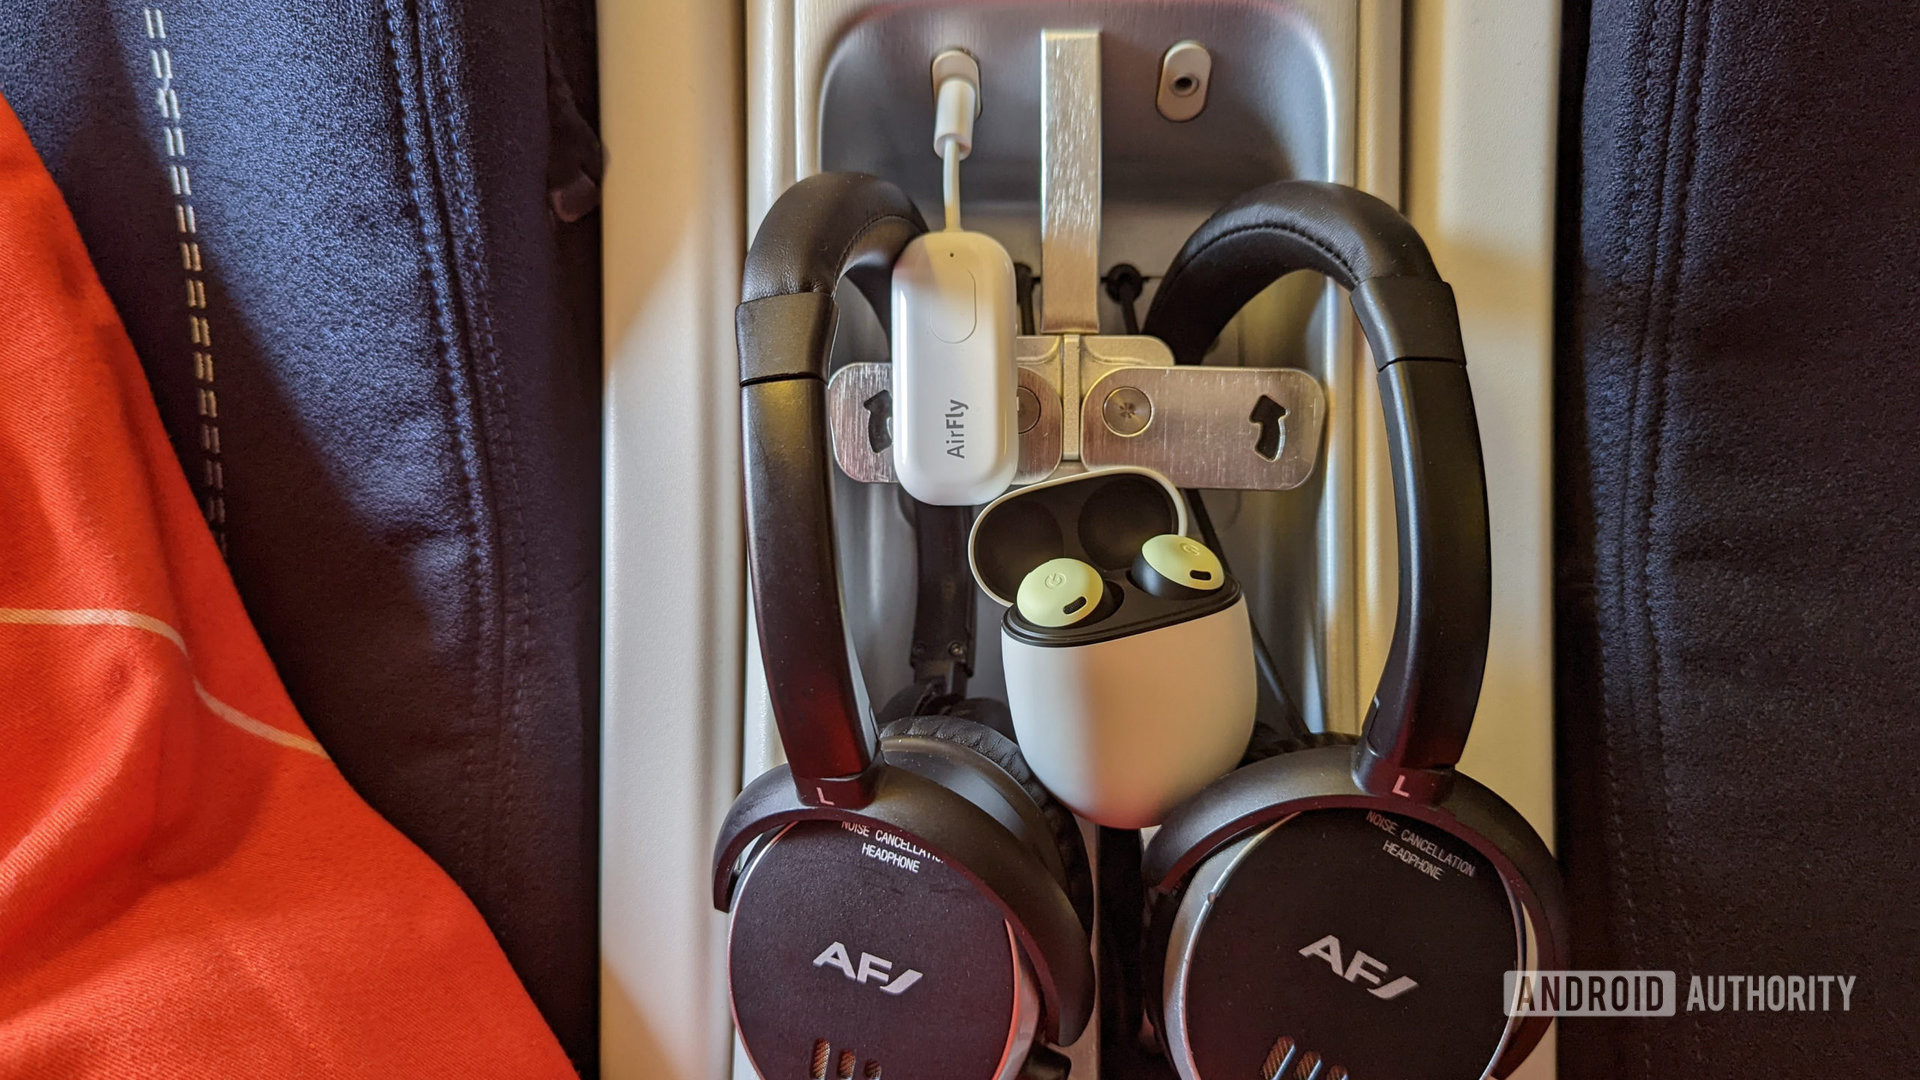 Airfly Pro connected to the passenger console of an Air France aircraft with Google Pixel Buds Pro and Air France headphones